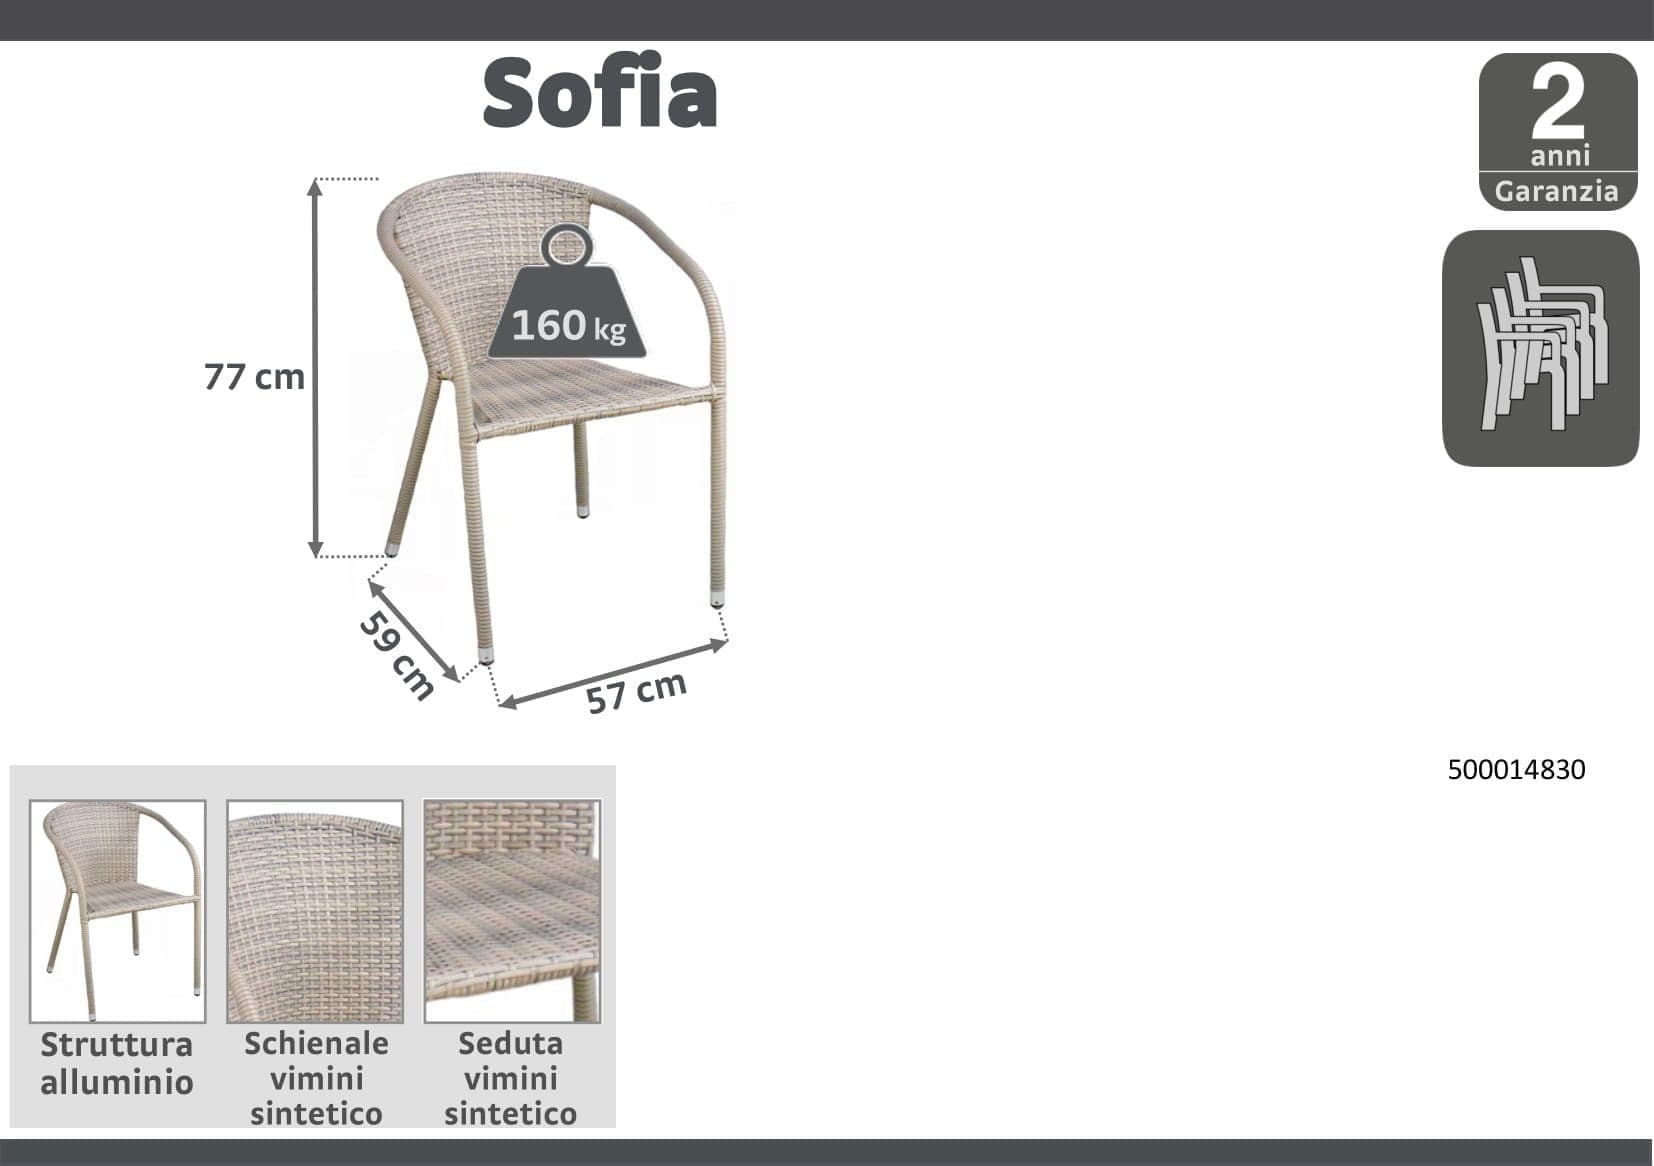 STACKABLE SOFIA CHAIR 57Xd59Xh77cm In steel covered in synthetic rattan